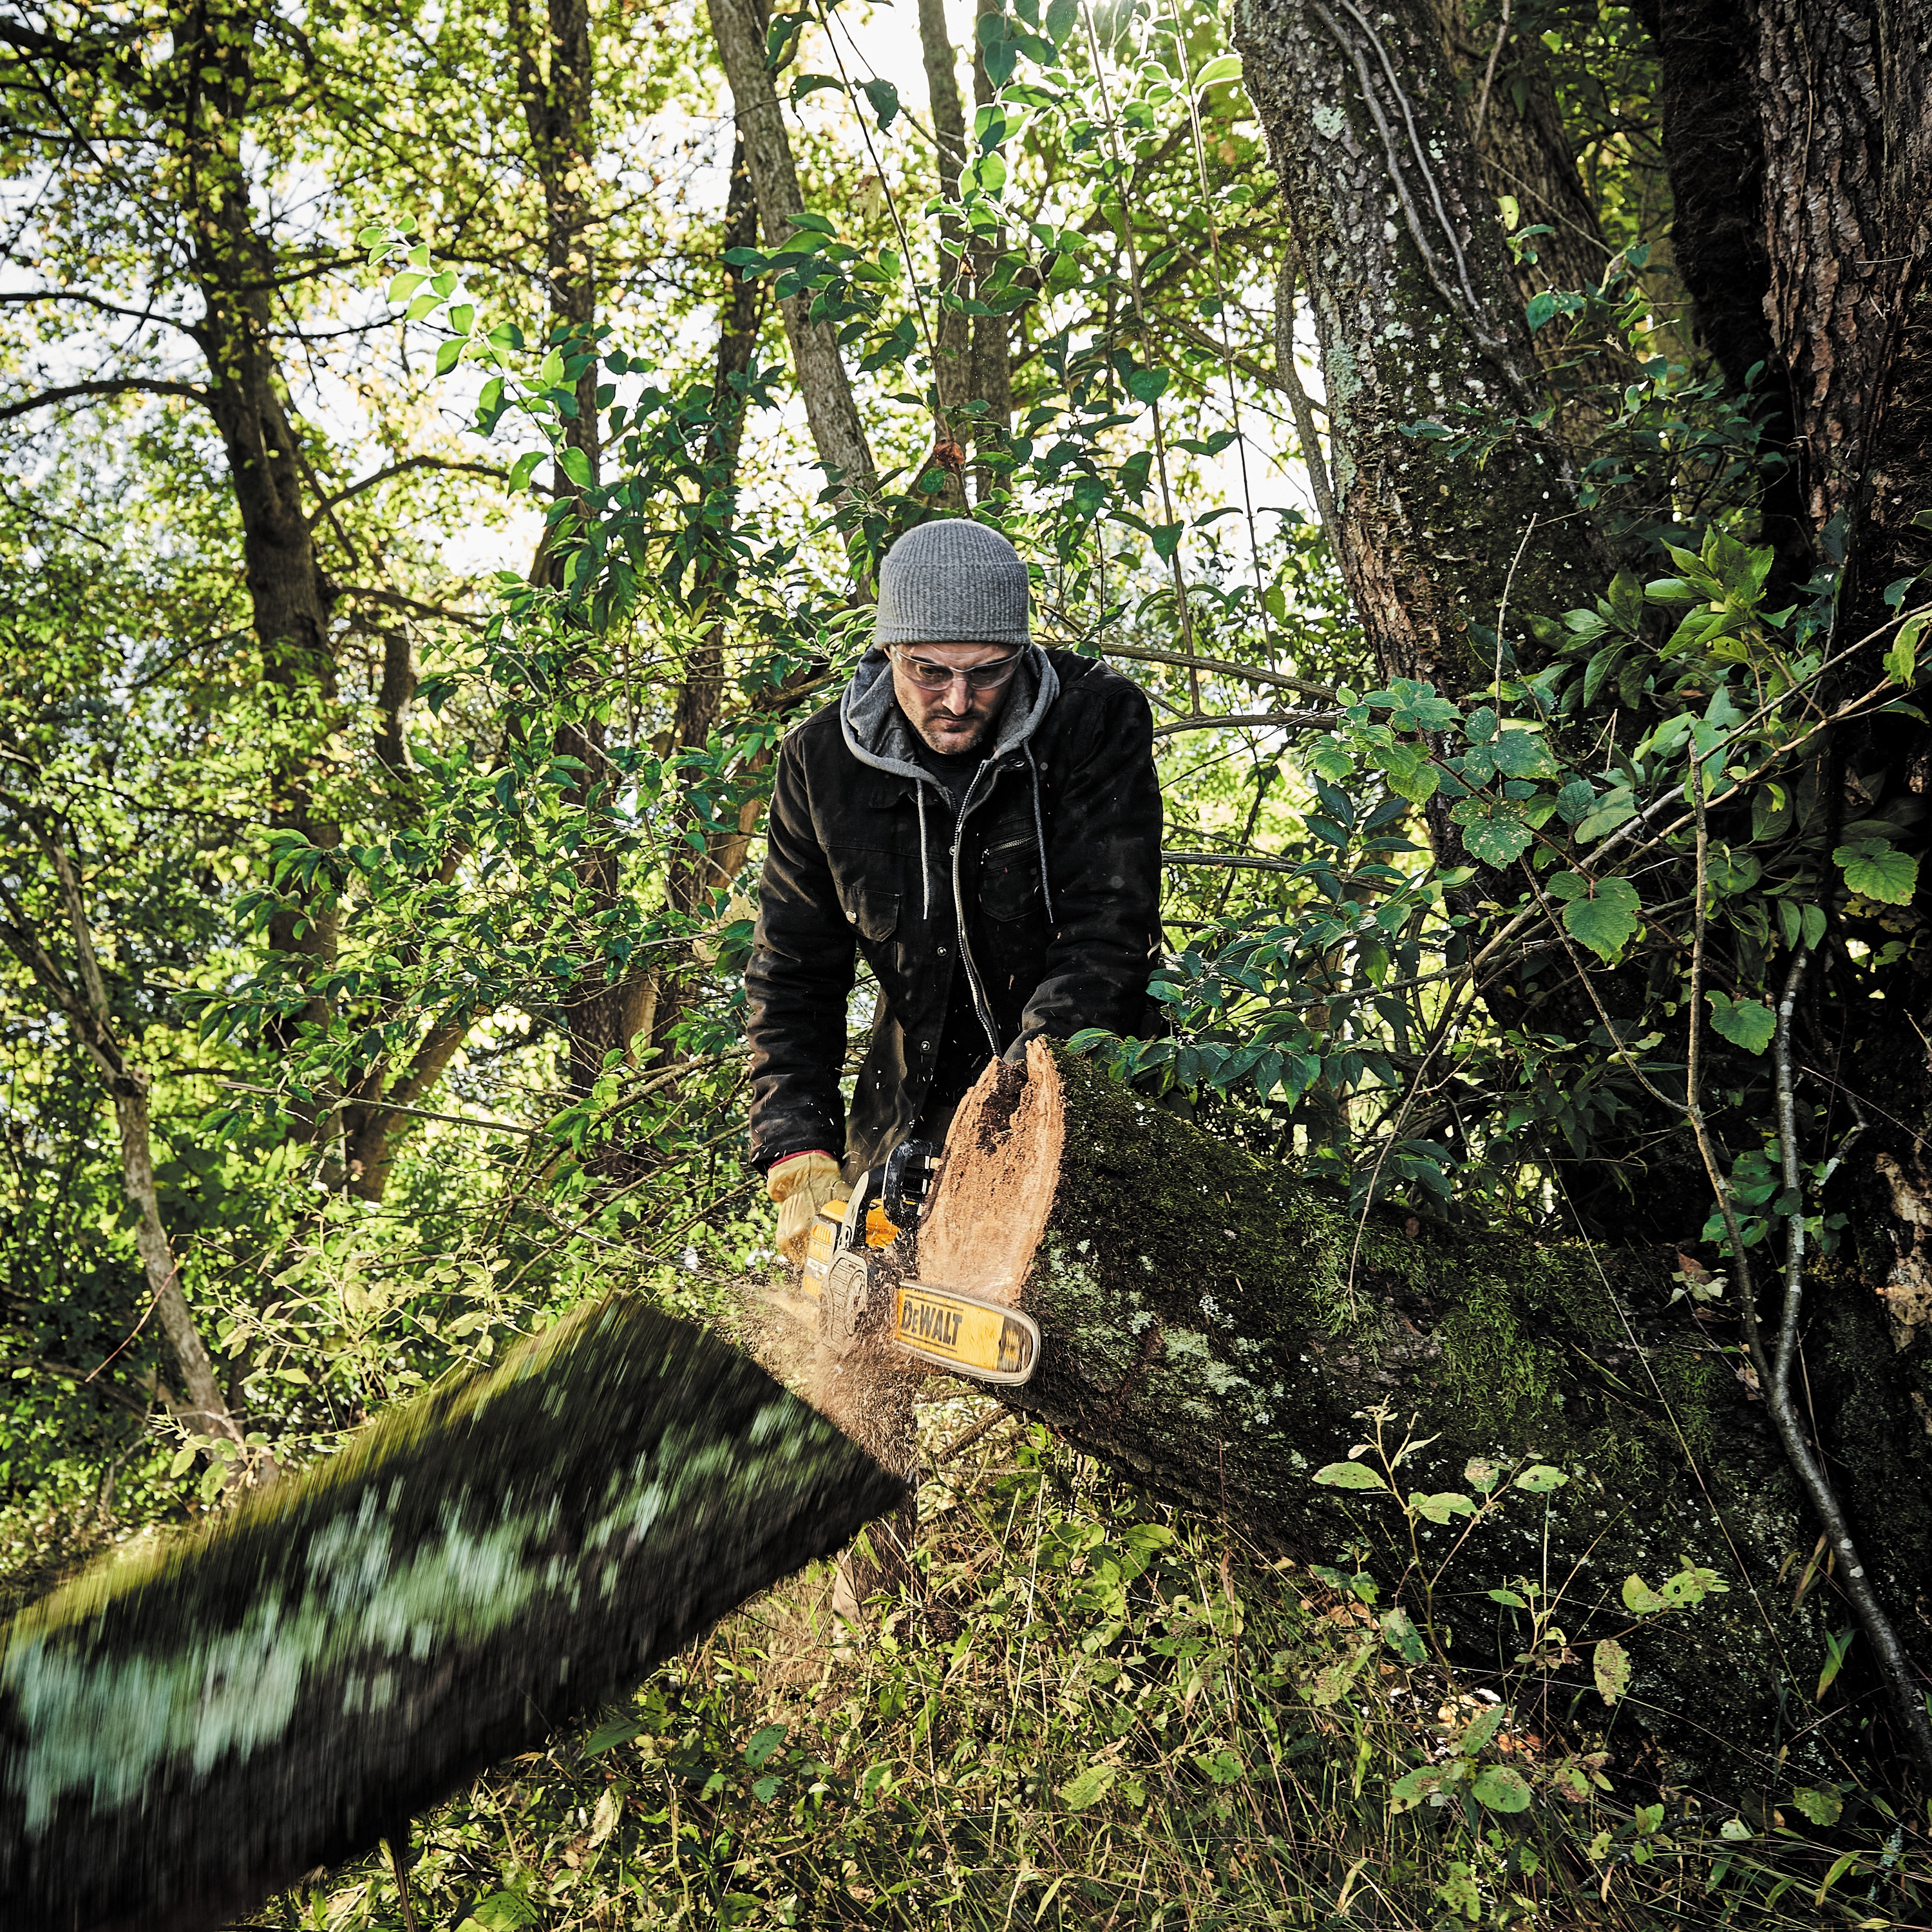 FLEXVOLT Cordless Chainsaw being used by a person to chop down tree trunks in  woods